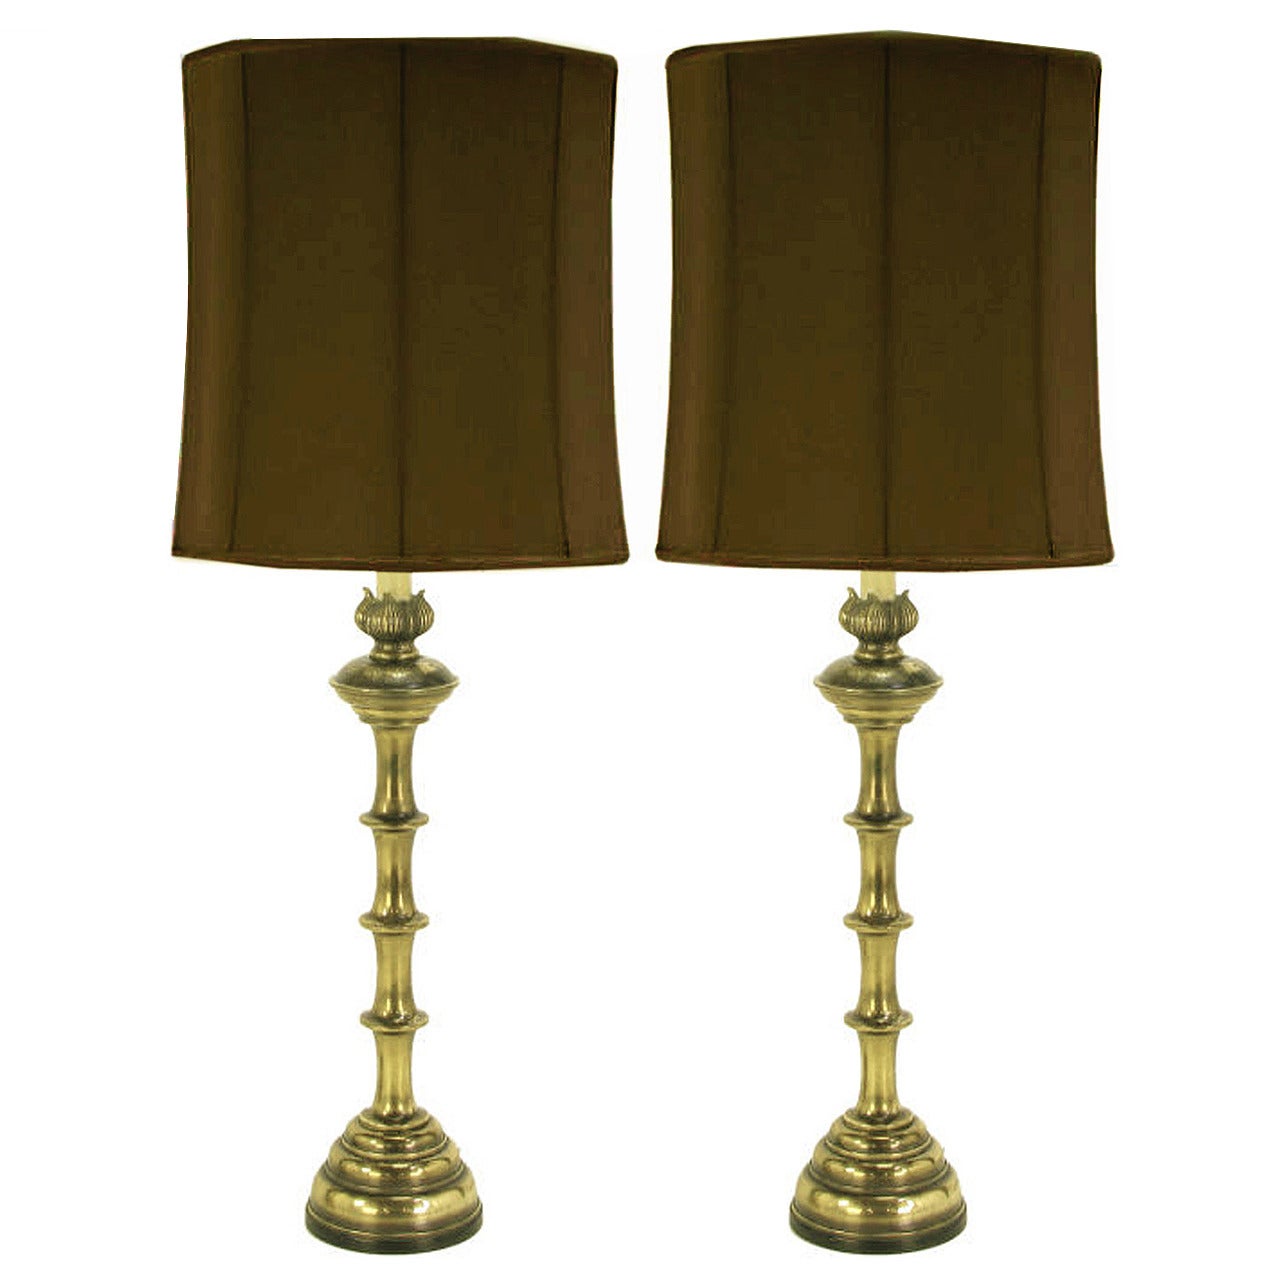 Pair of Stiffel Patinated Brass Table Lamps